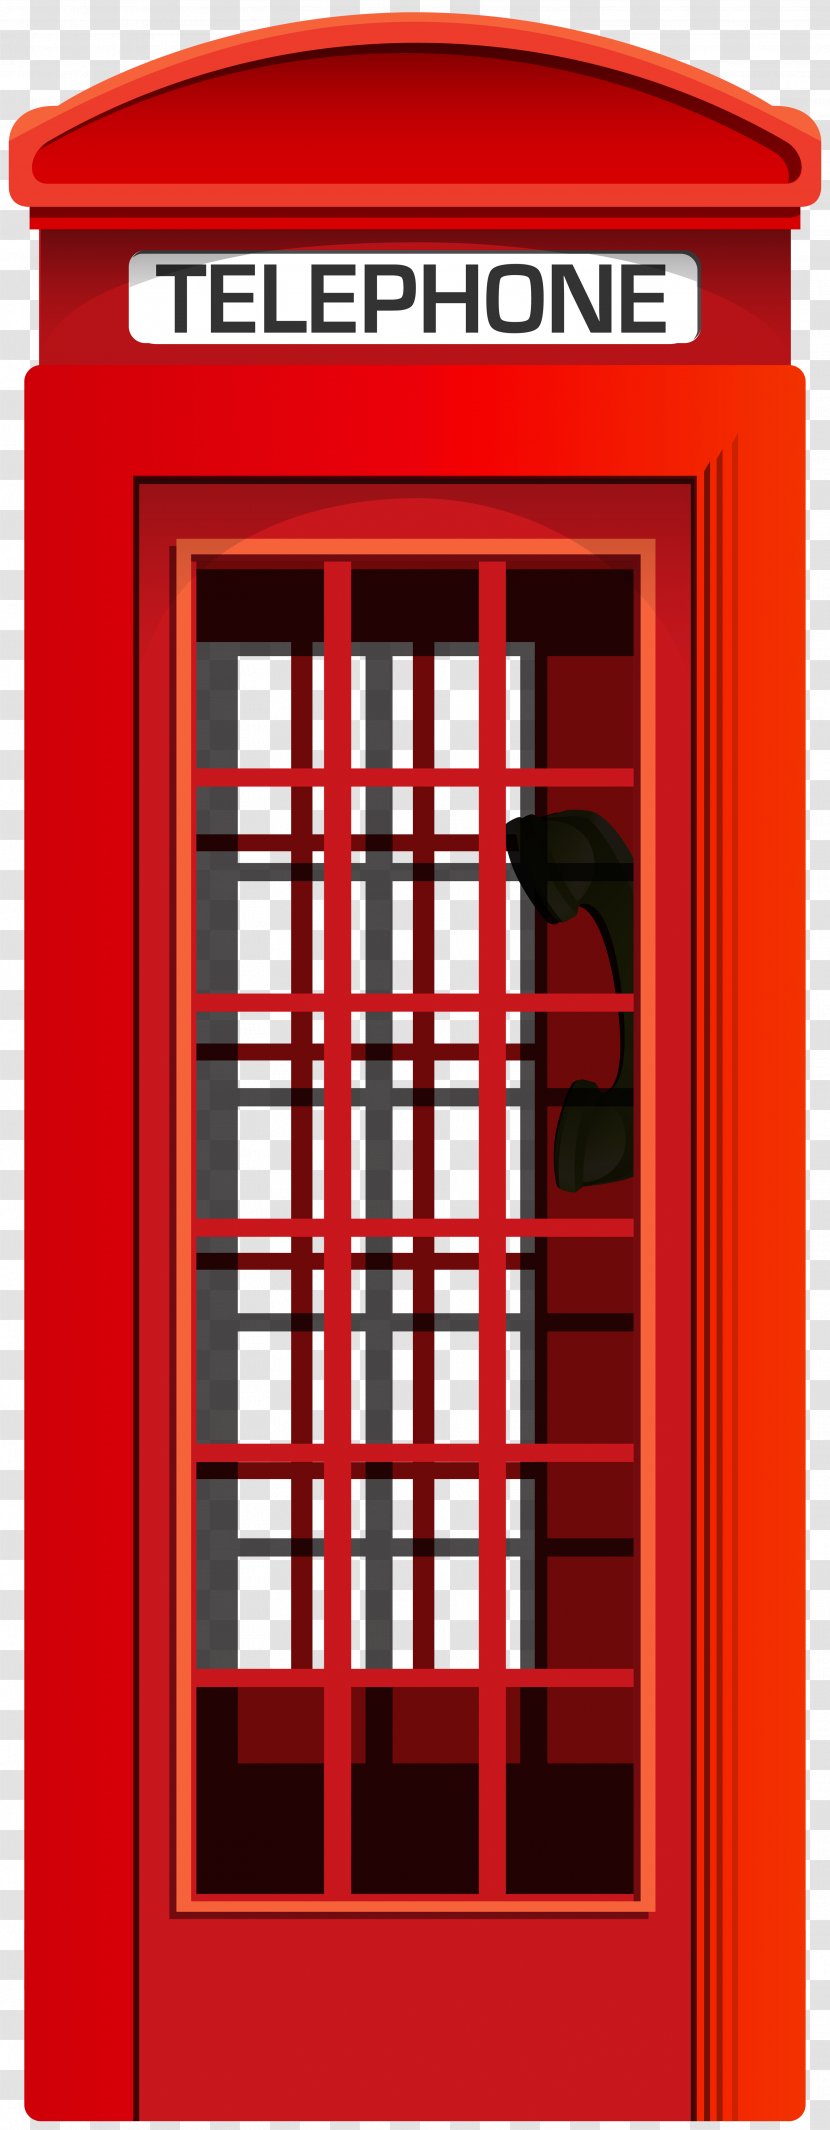 Telephone Booth Clip Art Payphone Image - Window - Illustration Transparent PNG